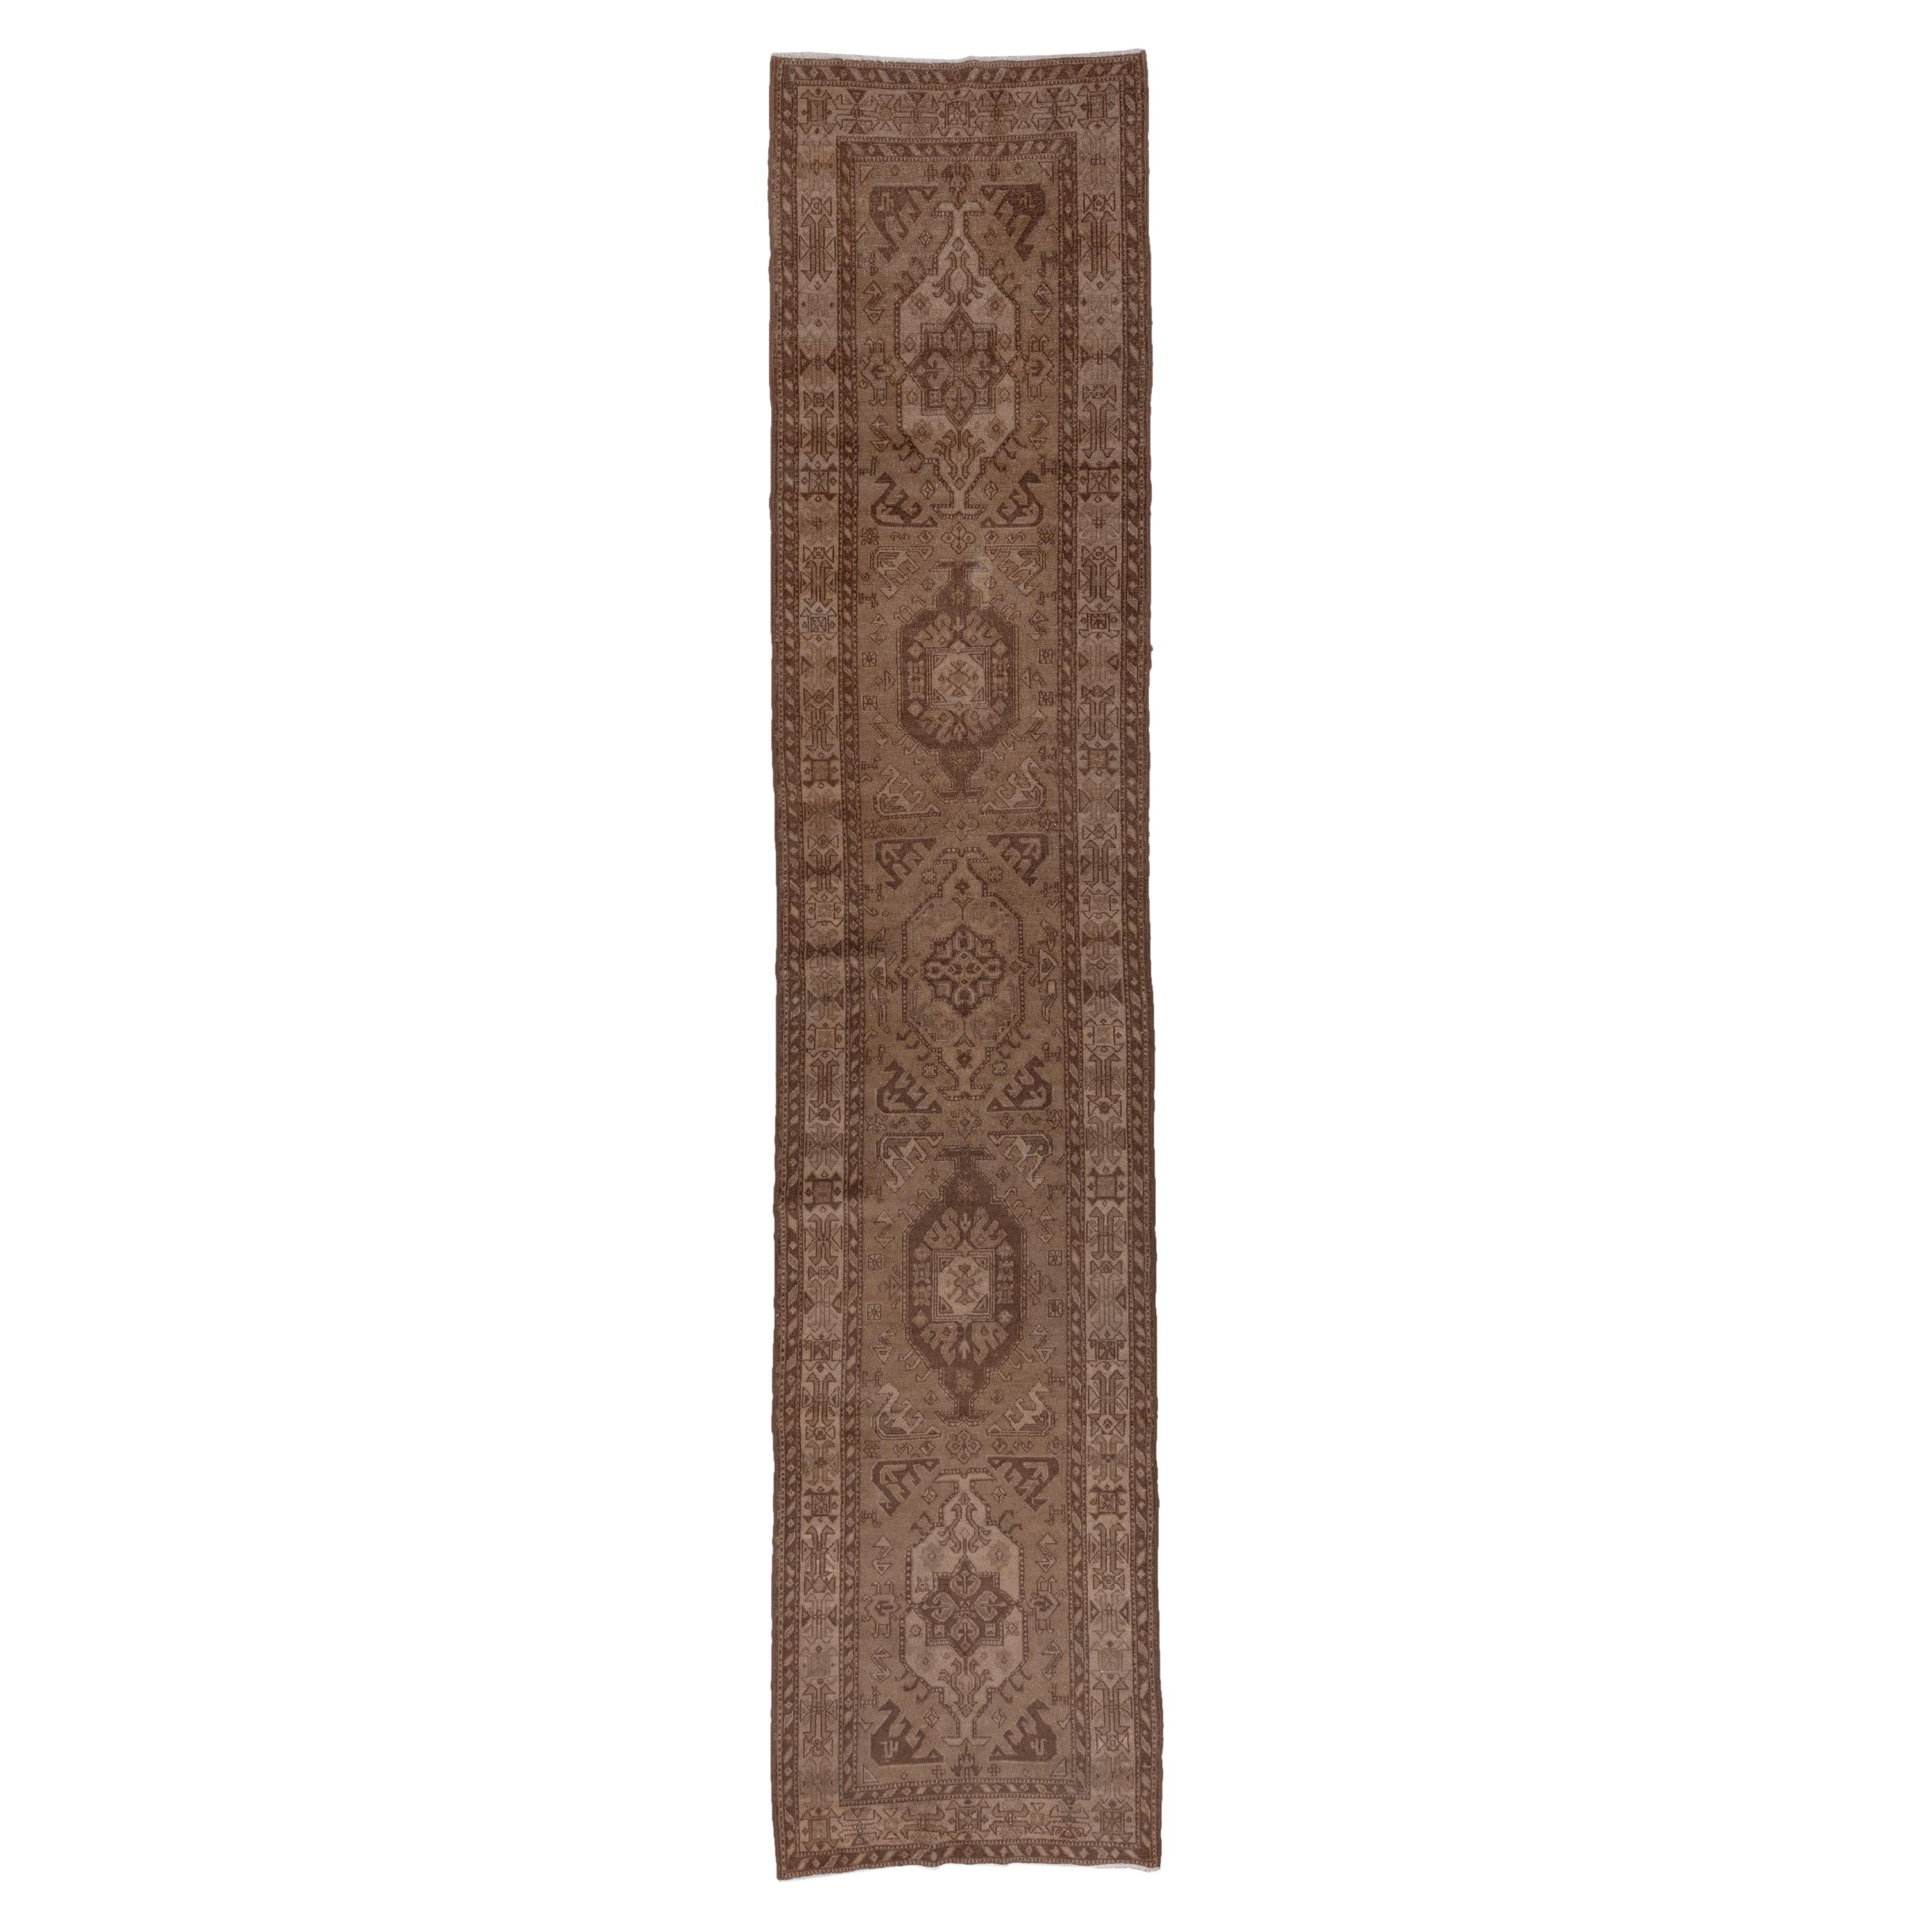 Tone on Tone Antique Brown Northwest Persian Runner, circa 1920s For Sale